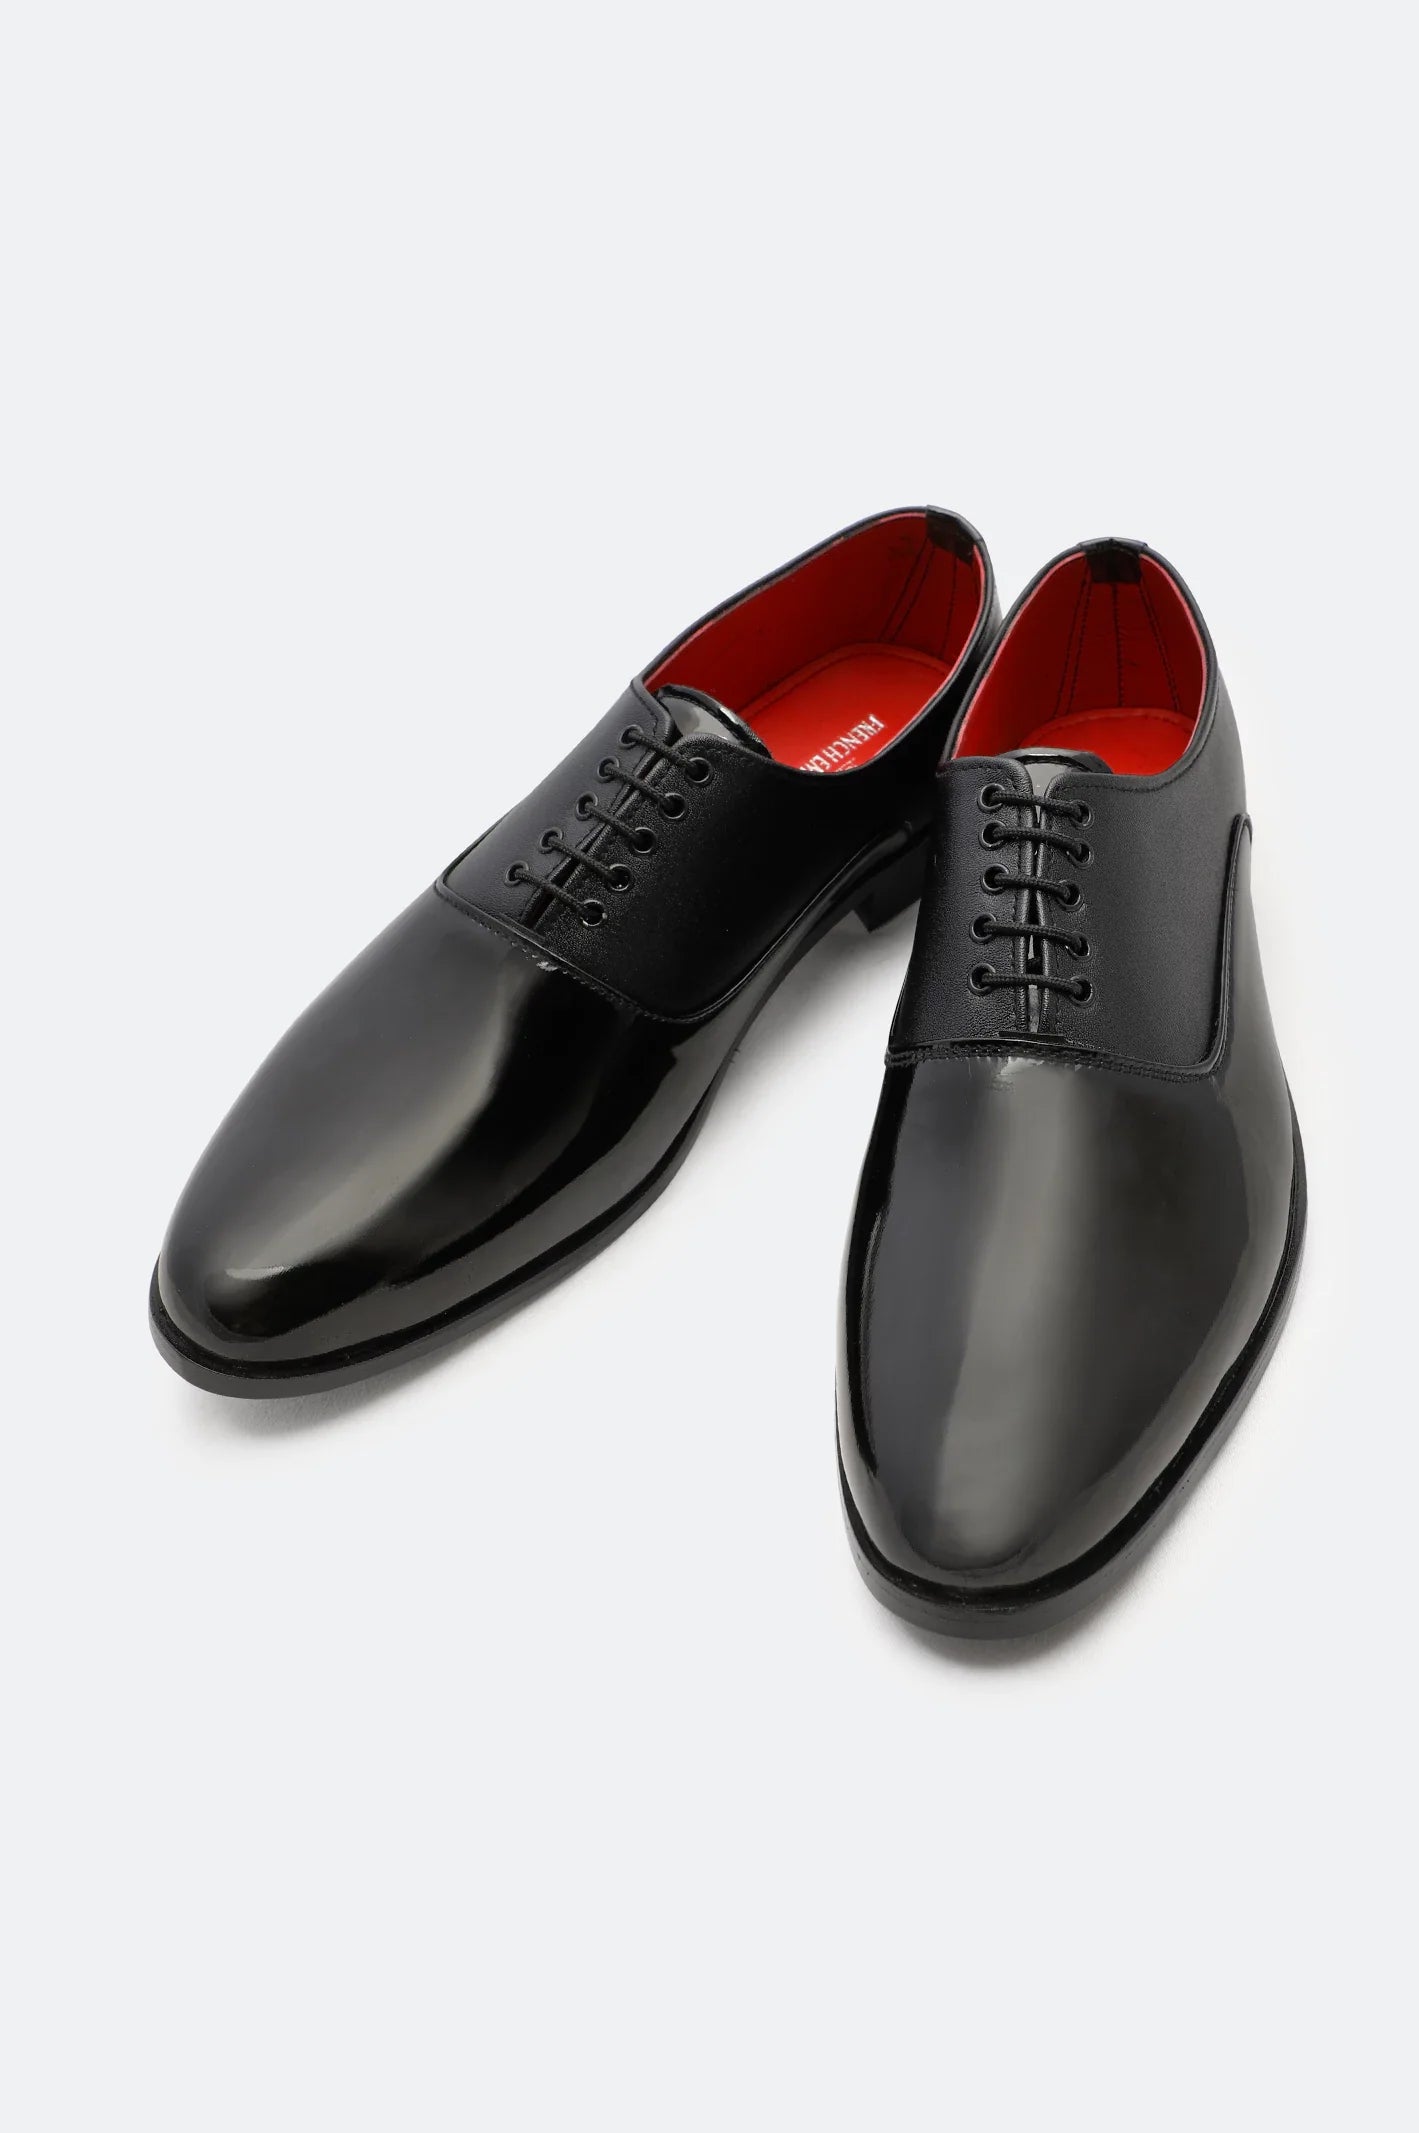 Black Formal Oxford Shoes From French Emporio By Diners